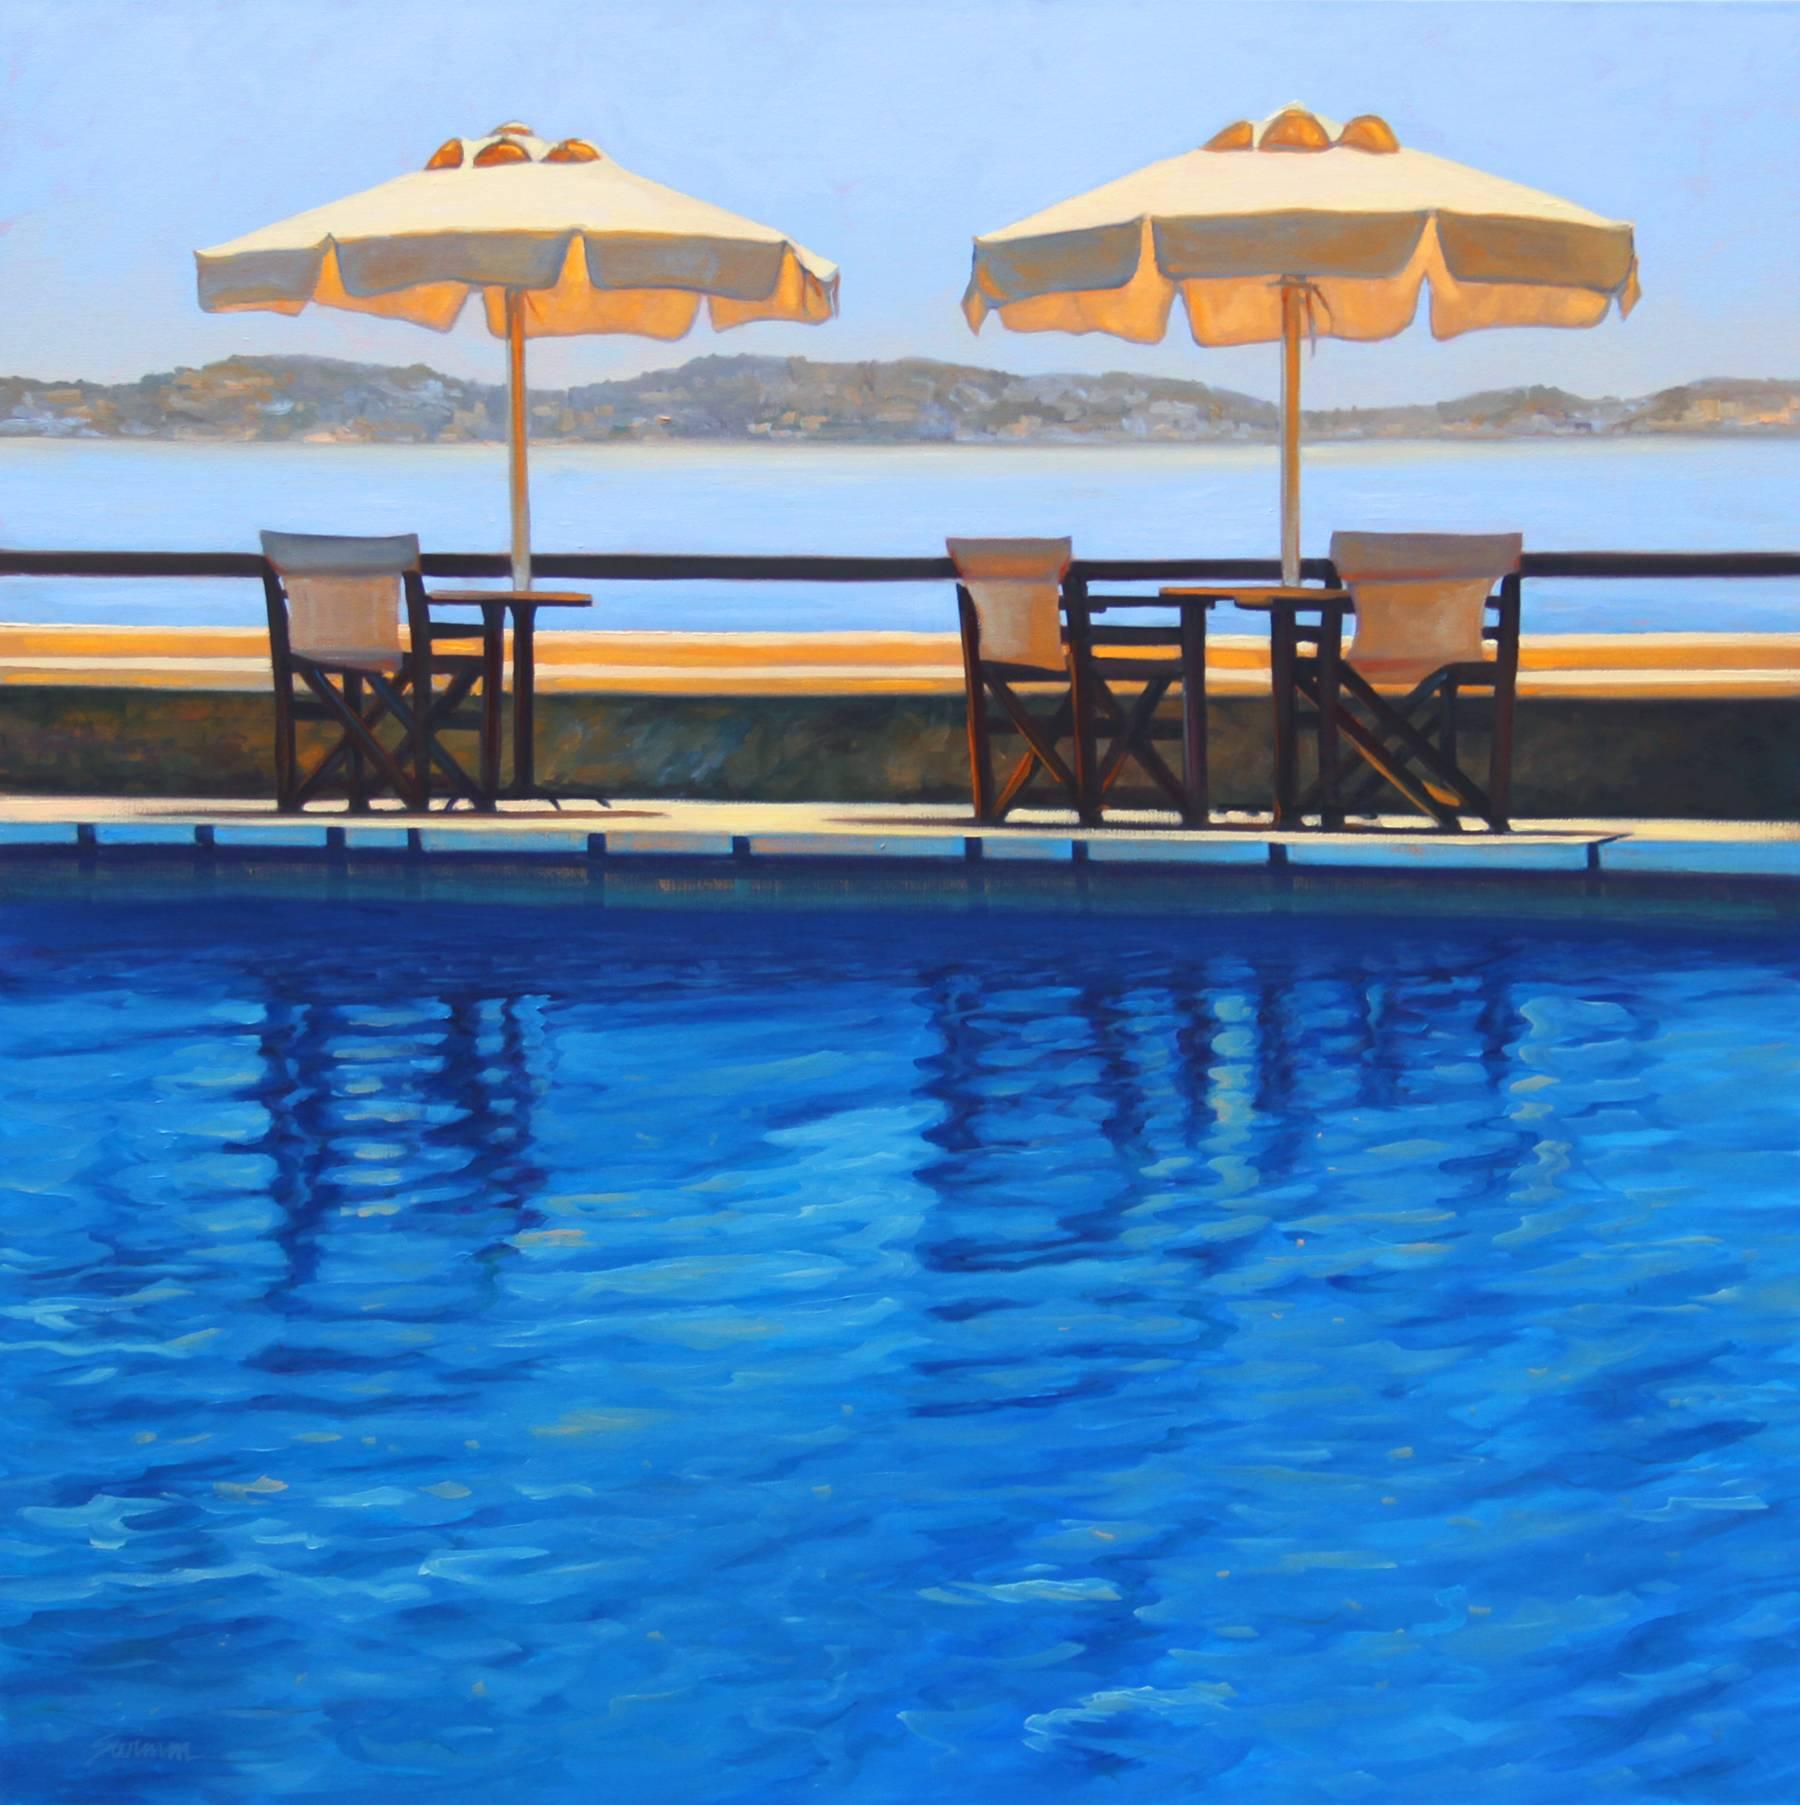 A stunning example of Tom Swimm's enhanced realism, this large oil painting of colorful umbrellas by a shimmering blue pool with the ocean in the background creates a tranquil, vacation mood."  This brilliant image of Mykonos, Greece exhibits the